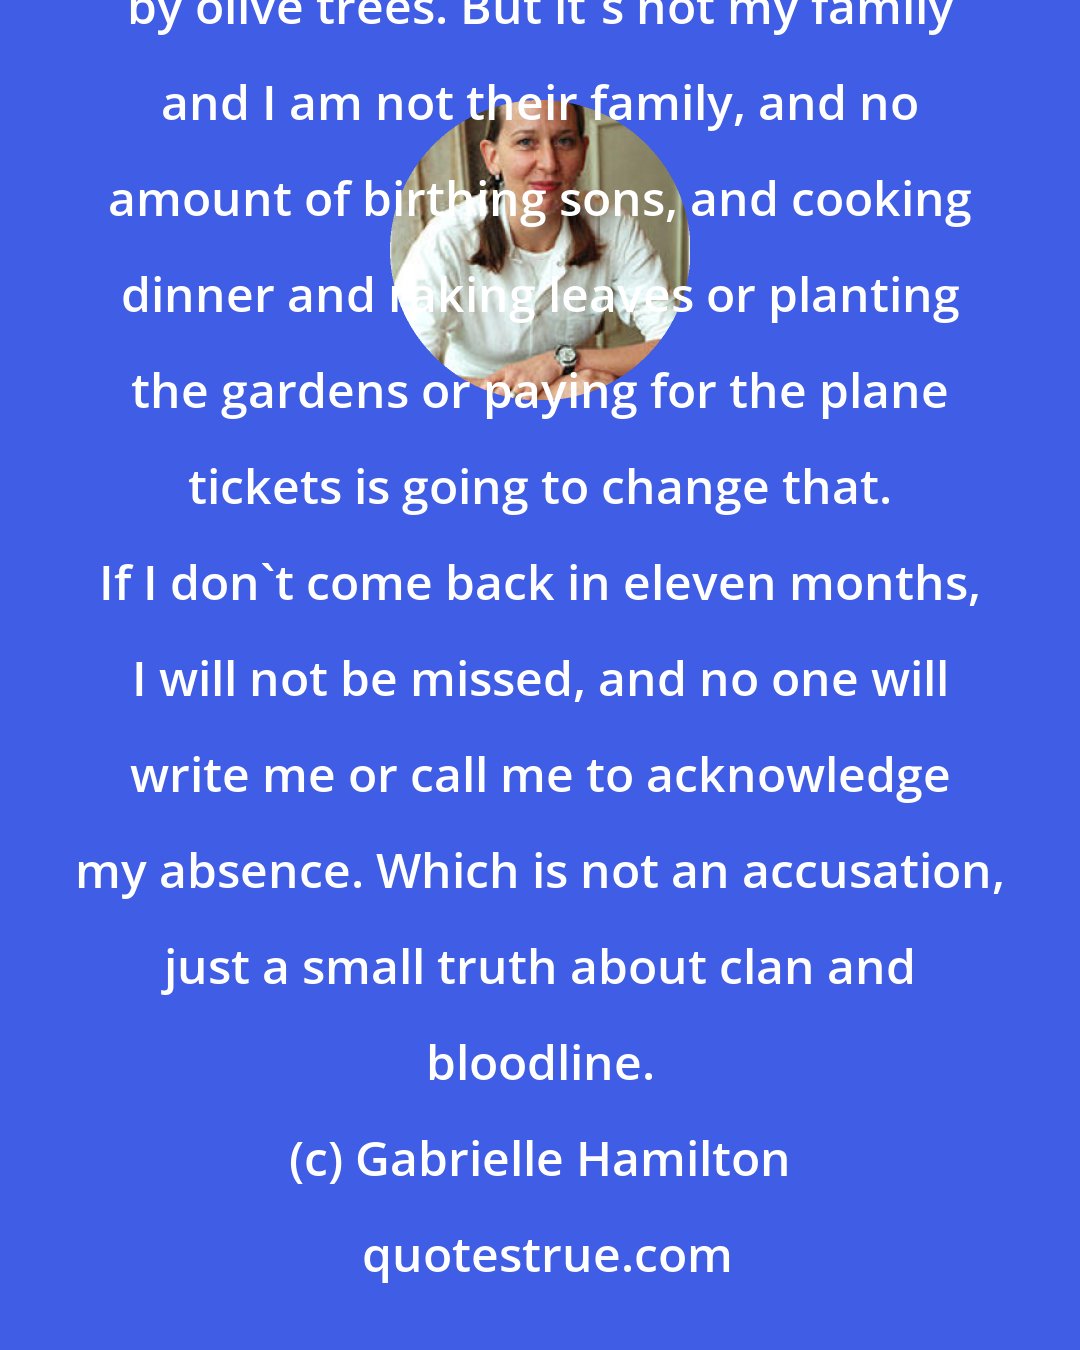 Gabrielle Hamilton: It's promising and seductive, that huge Italian family, sitting around the dinner table, surrounded by olive trees. But it's not my family and I am not their family, and no amount of birthing sons, and cooking dinner and raking leaves or planting the gardens or paying for the plane tickets is going to change that. If I don't come back in eleven months, I will not be missed, and no one will write me or call me to acknowledge my absence. Which is not an accusation, just a small truth about clan and bloodline.